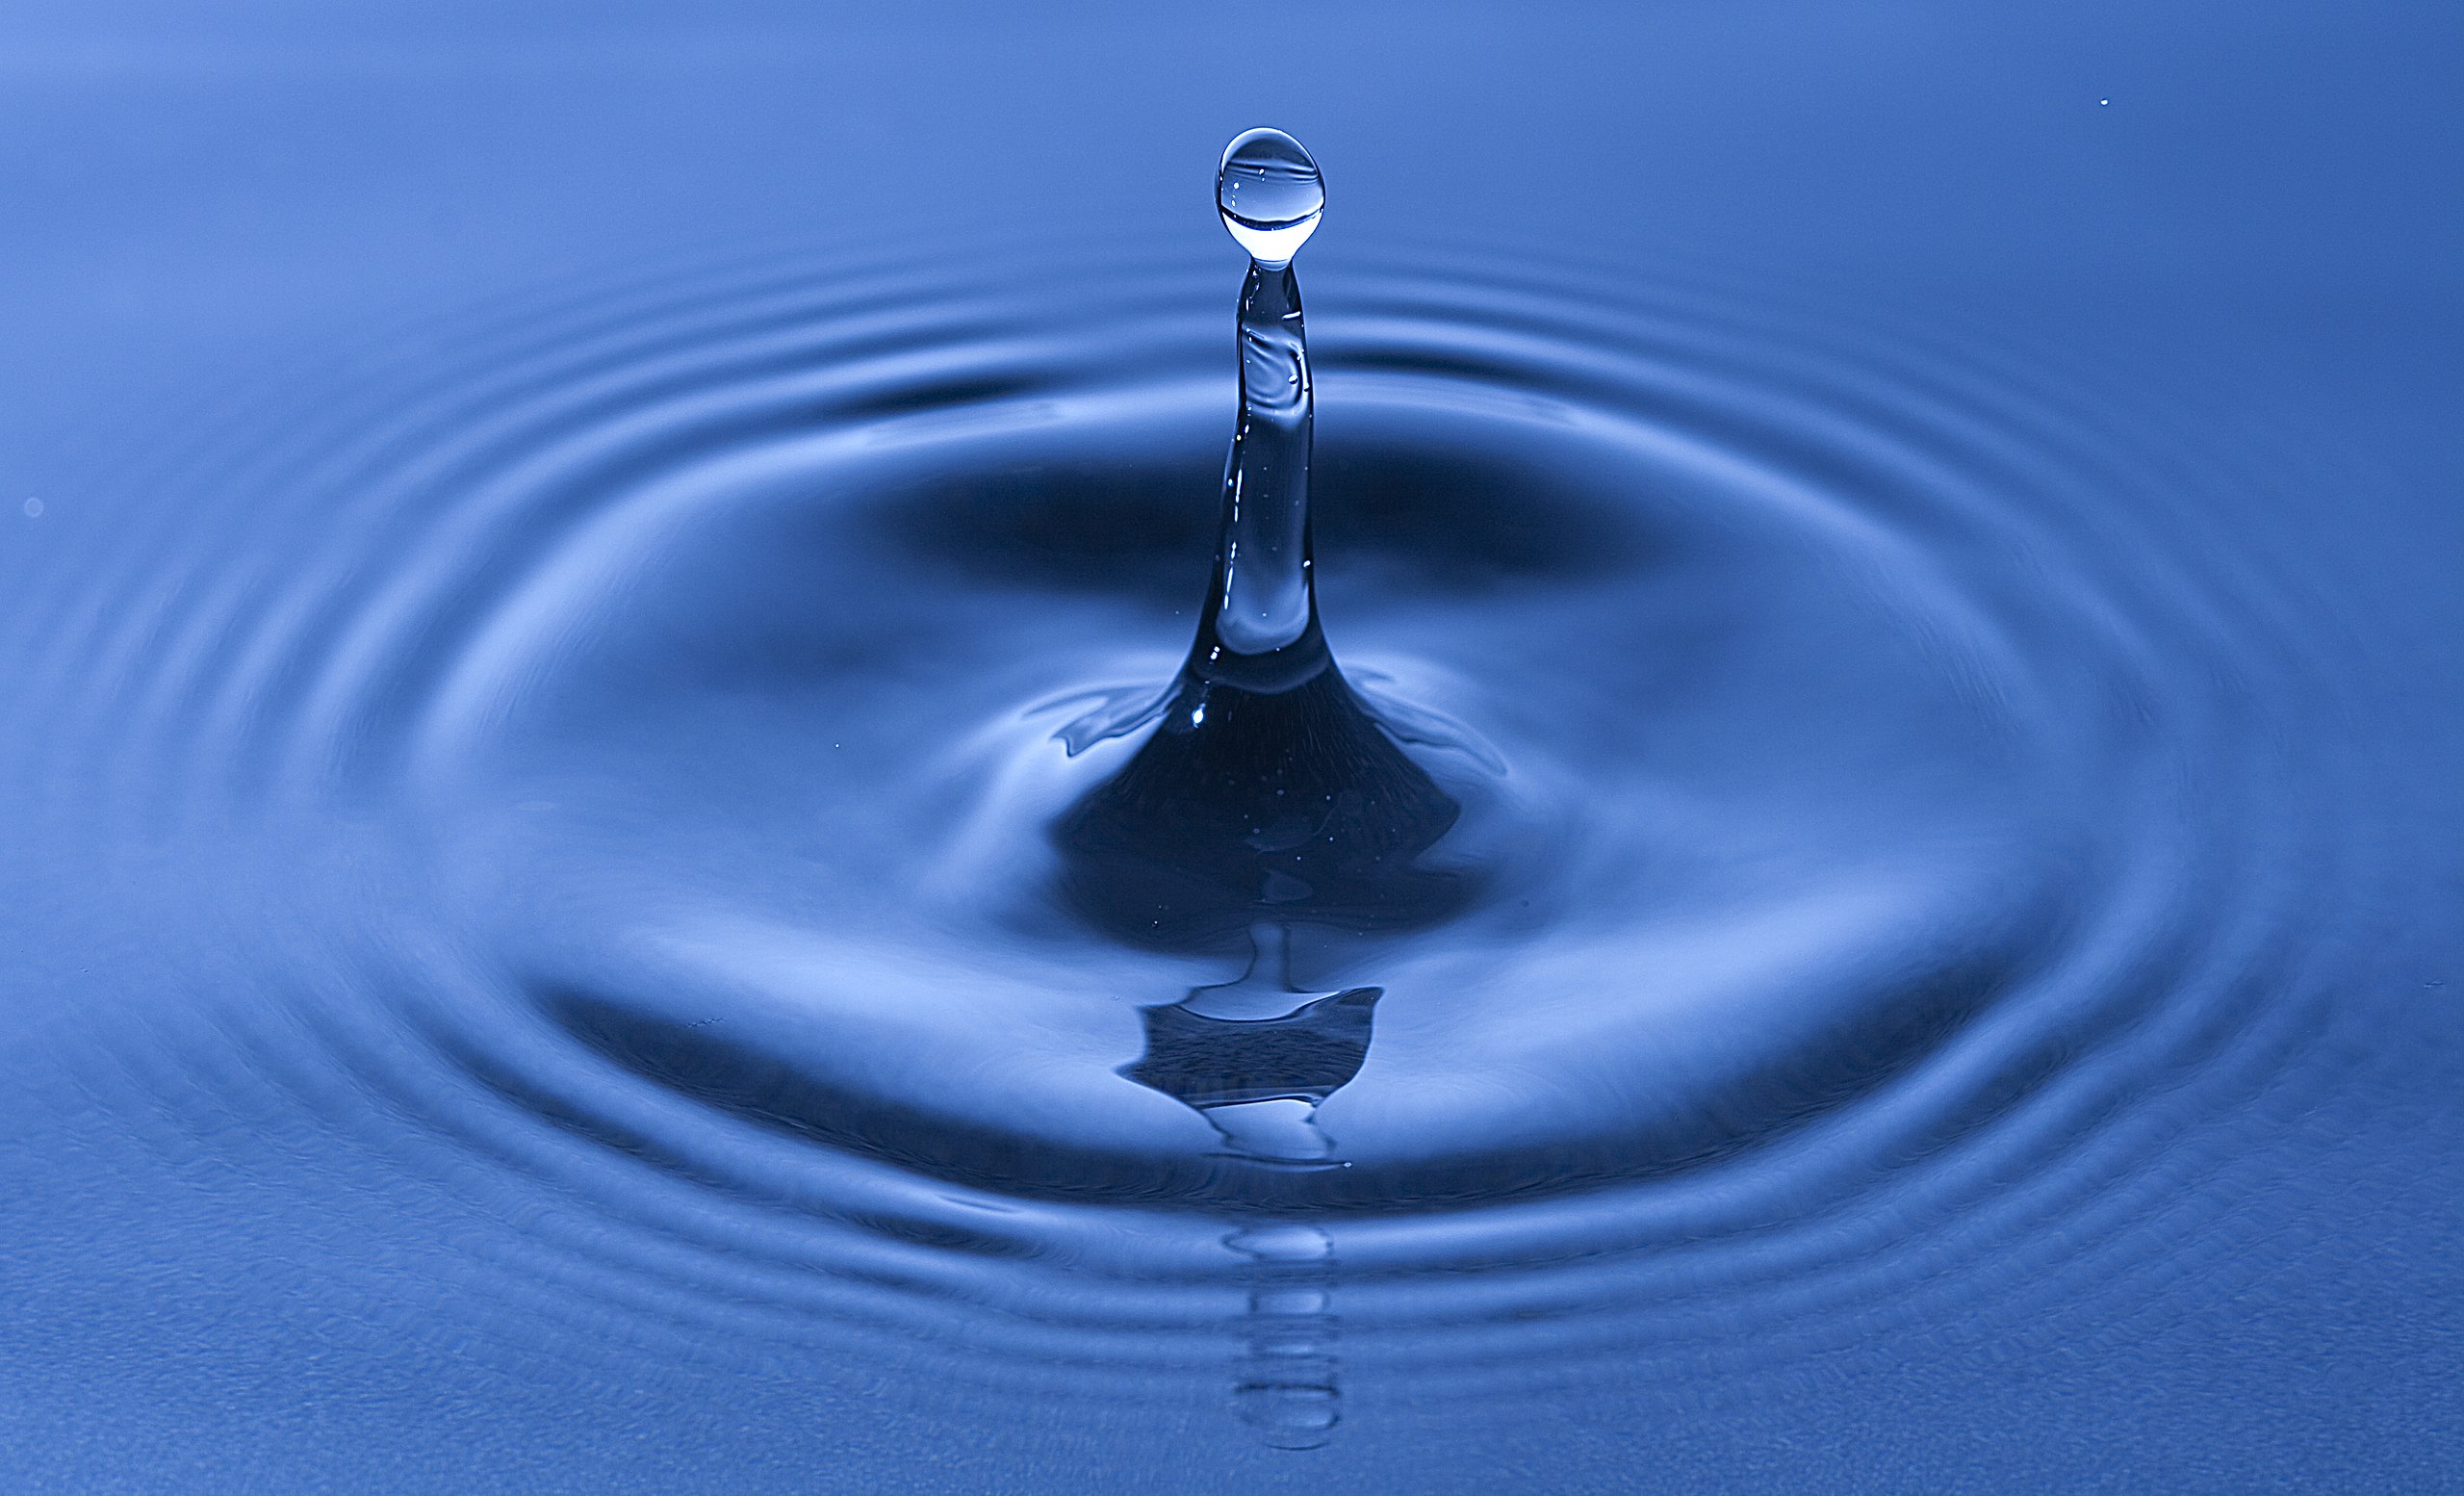 File:Water drop impact on a water-surface - (1).jpg - Wikimedia Commons